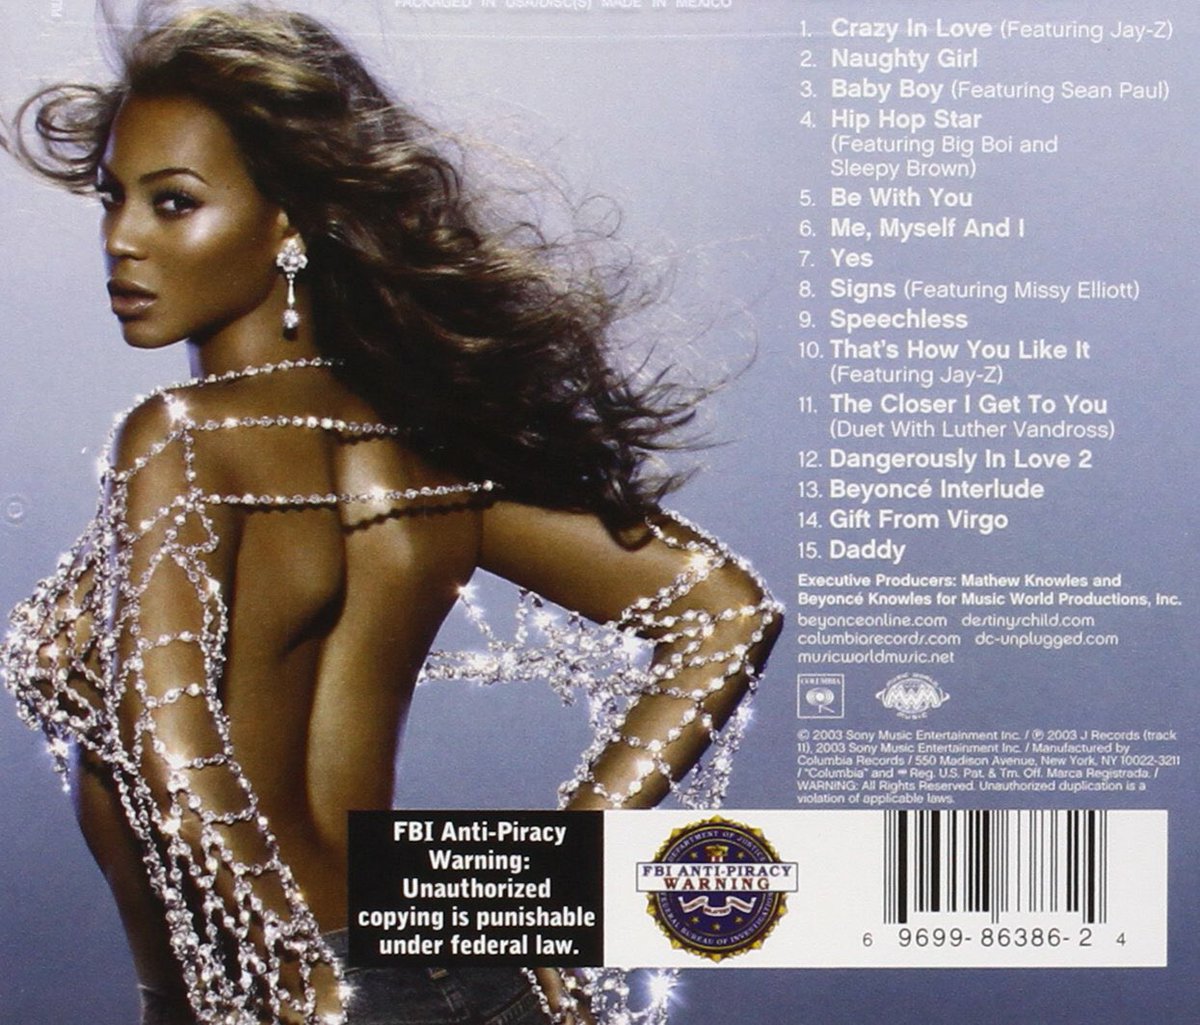 What’s your favorite song on Beyoncé’s Dangerously in love album? 